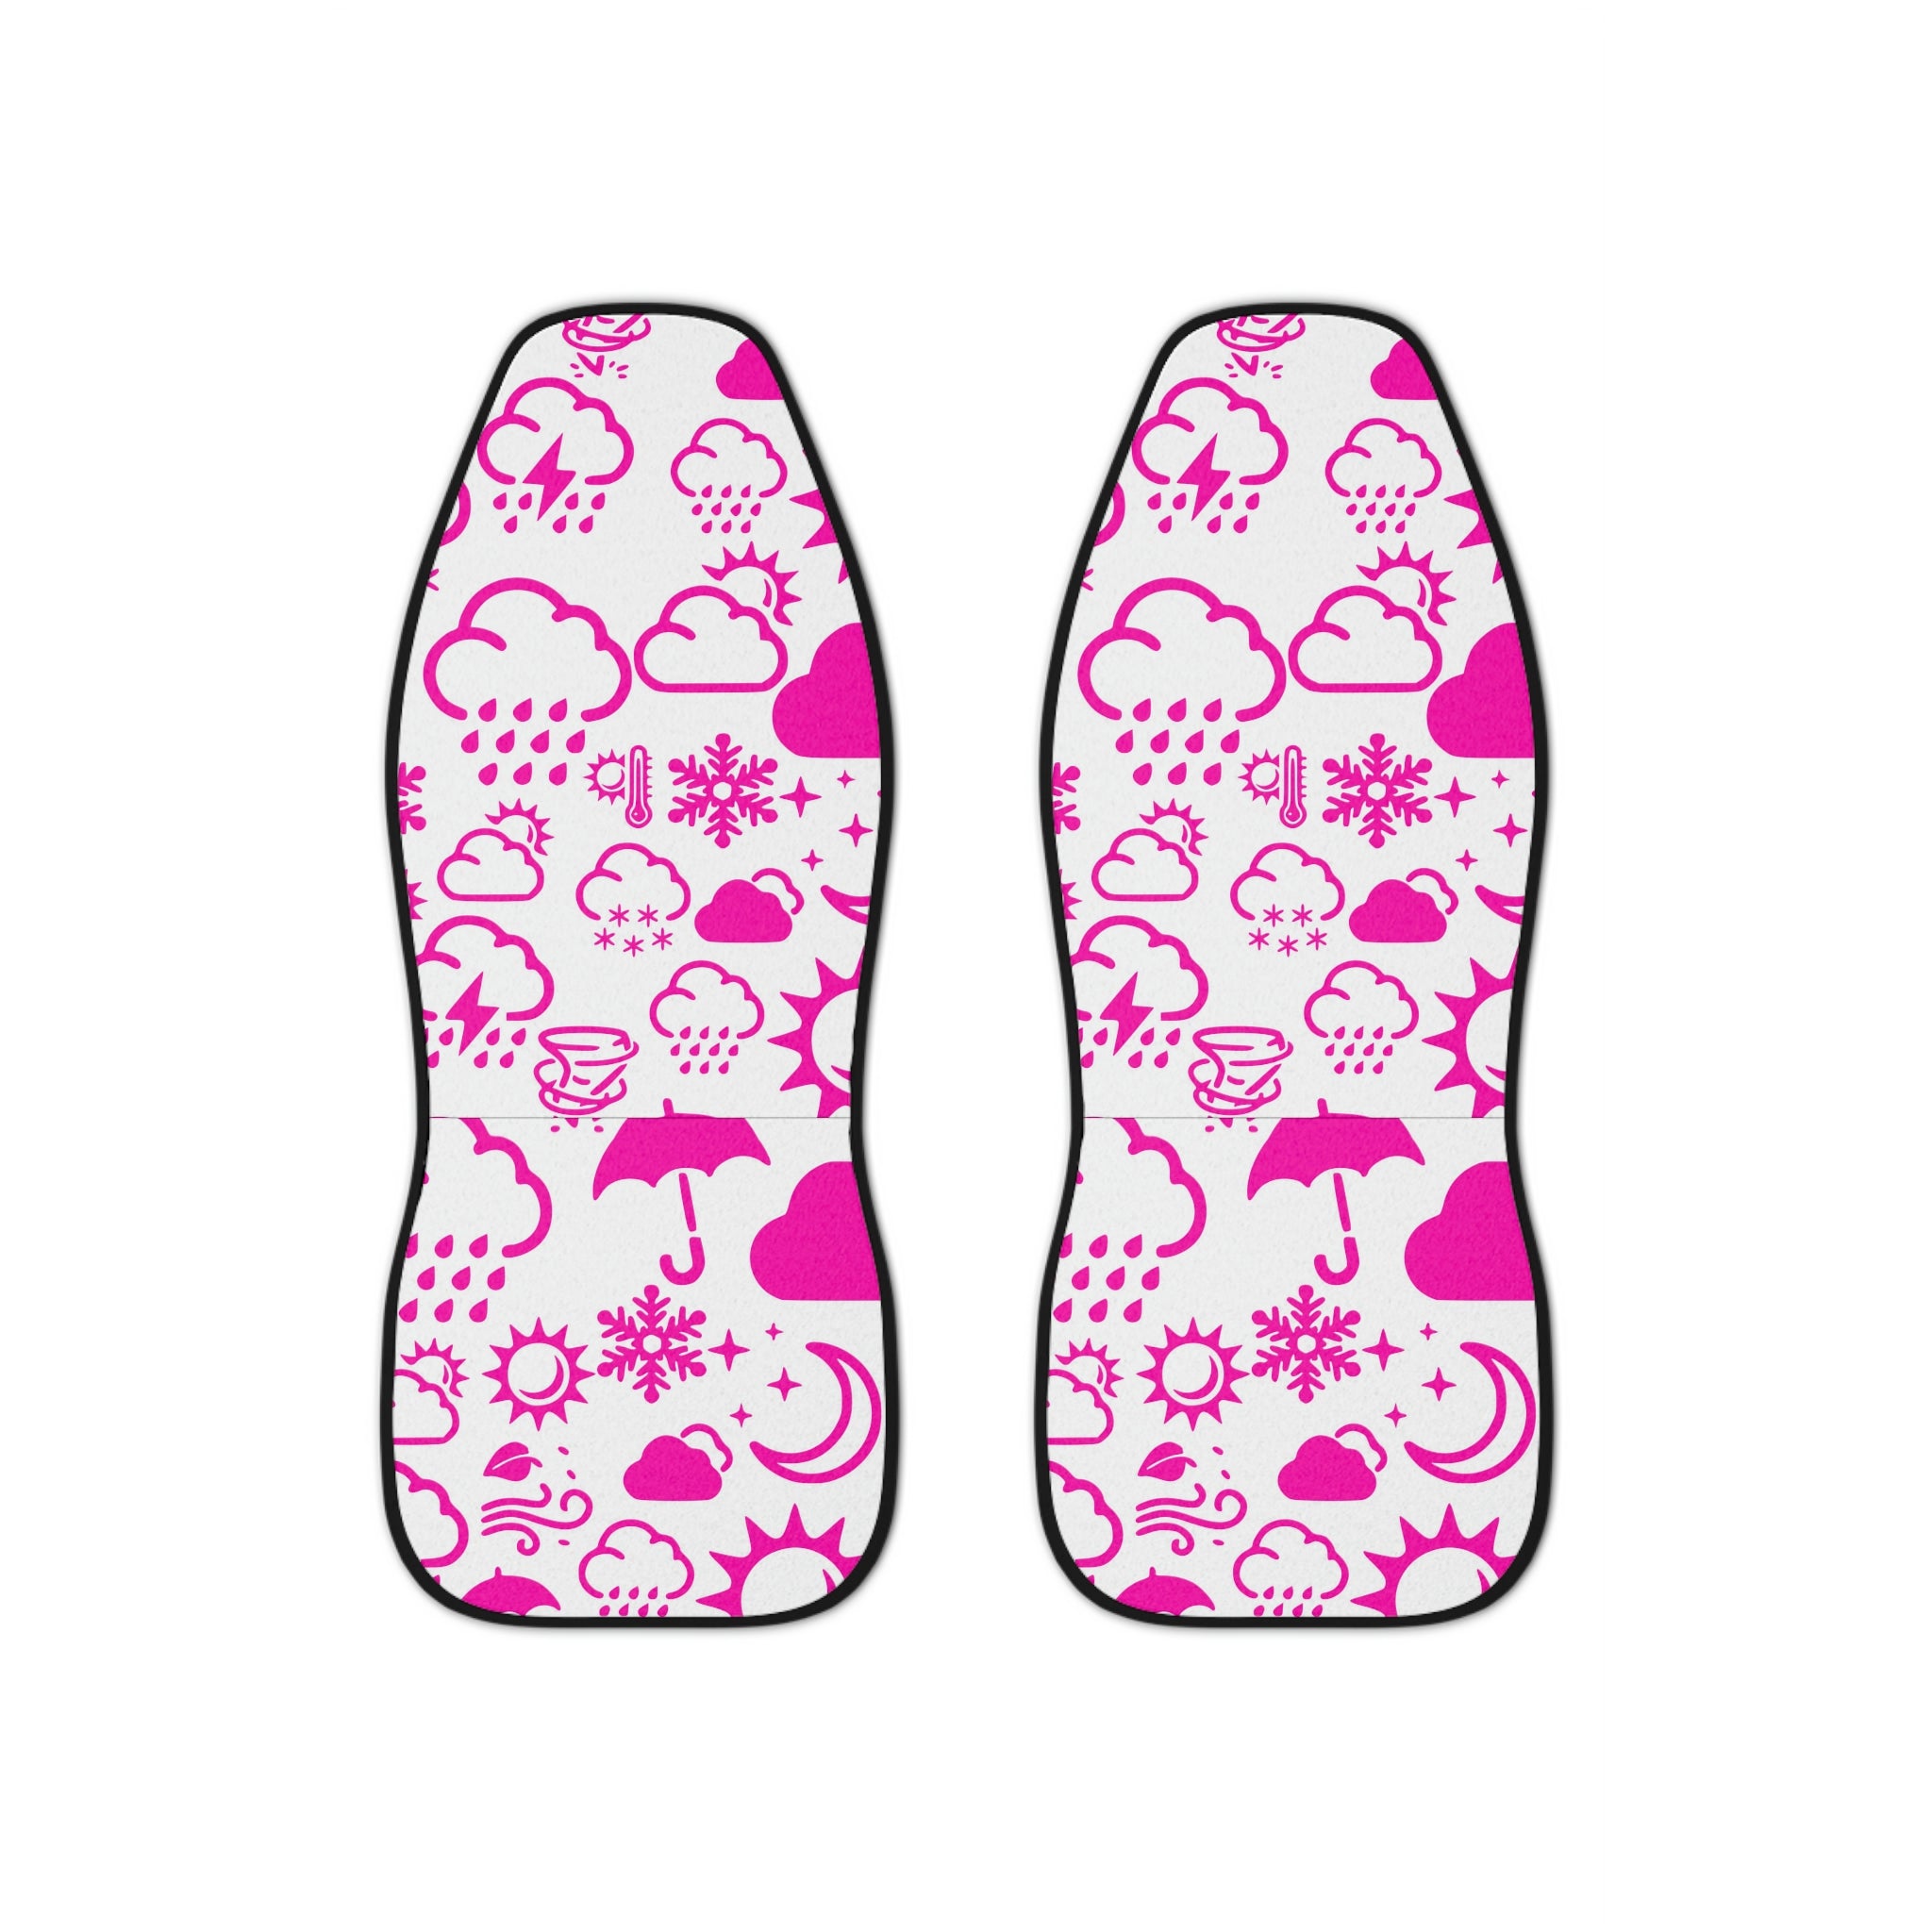 Wx Icon (Pink/White) Car Seat Covers 